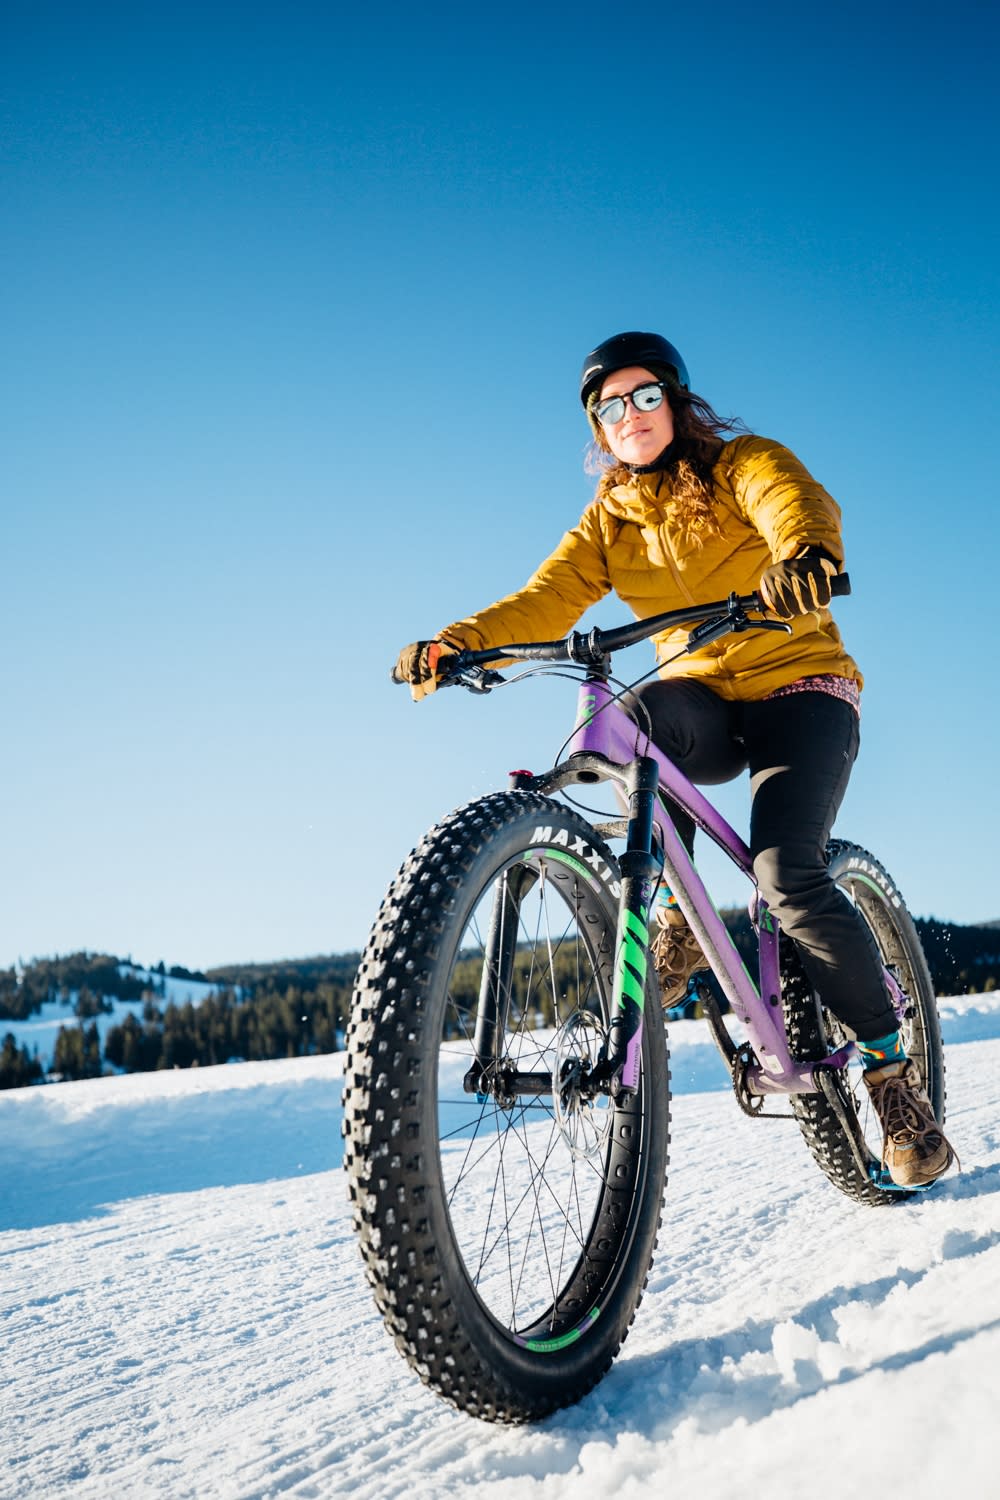 A man rides a fat bike during winter in Big Sky photo by Jonathan Finch